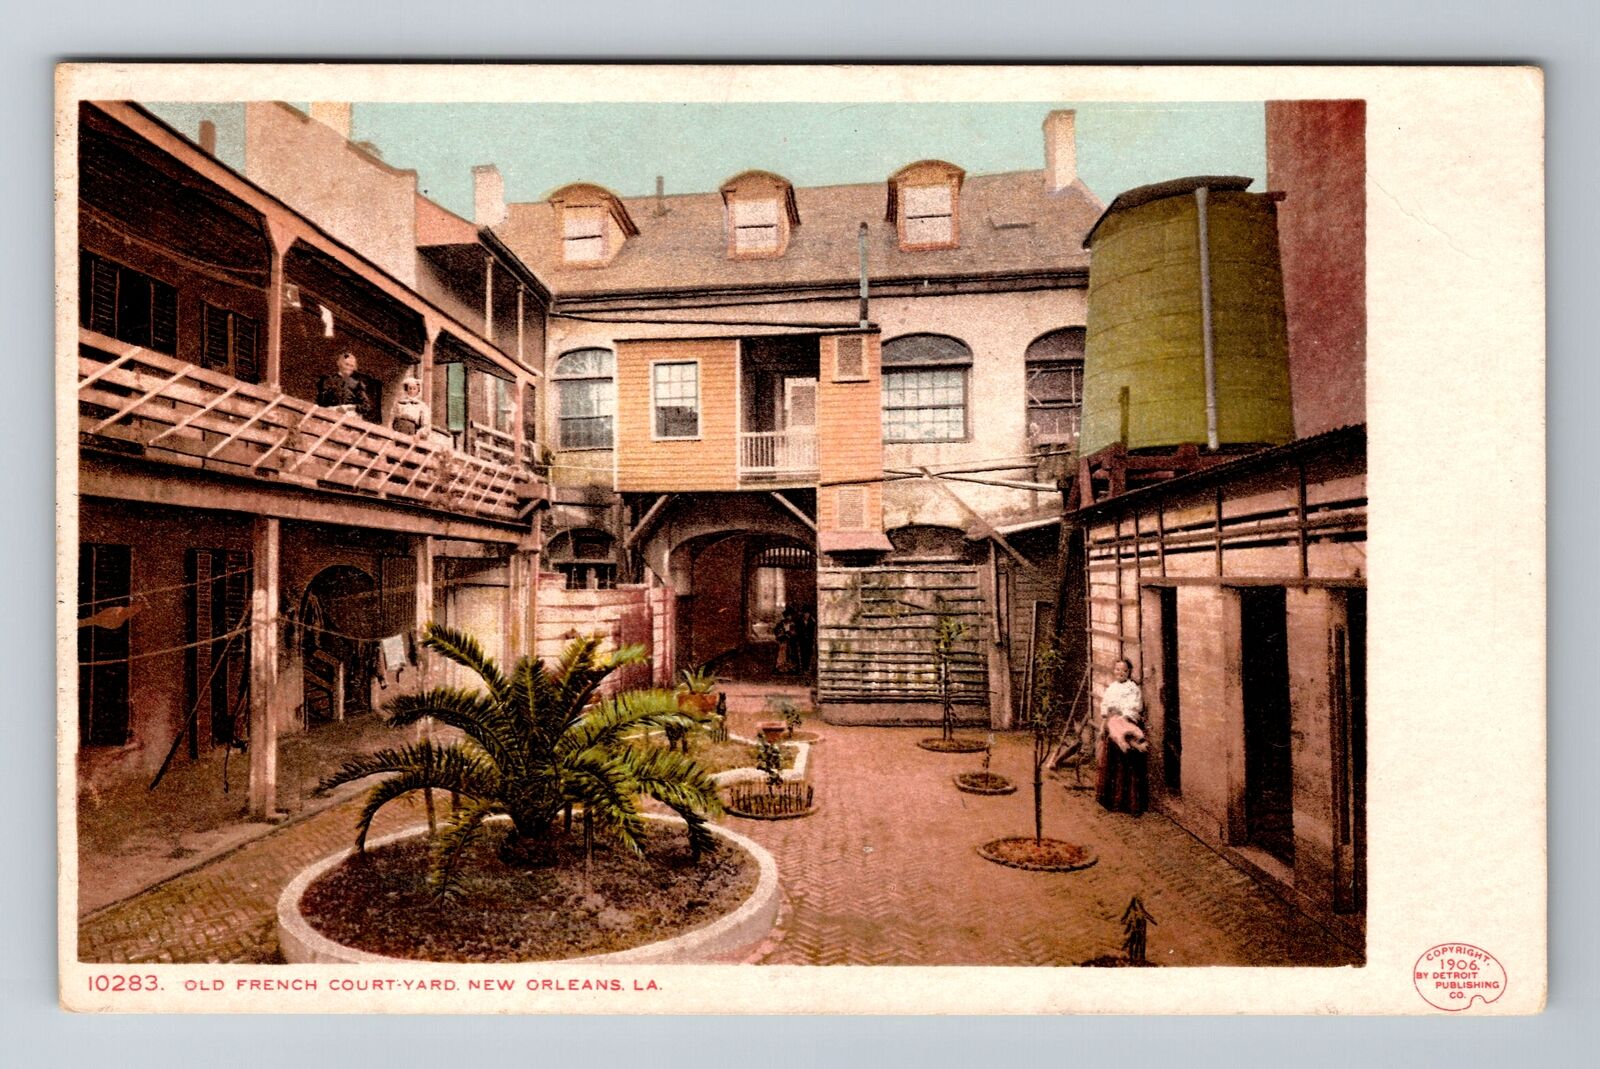 New Orleans LA-Louisiana, Old French Court Yard, Antique, Vintage Postcard